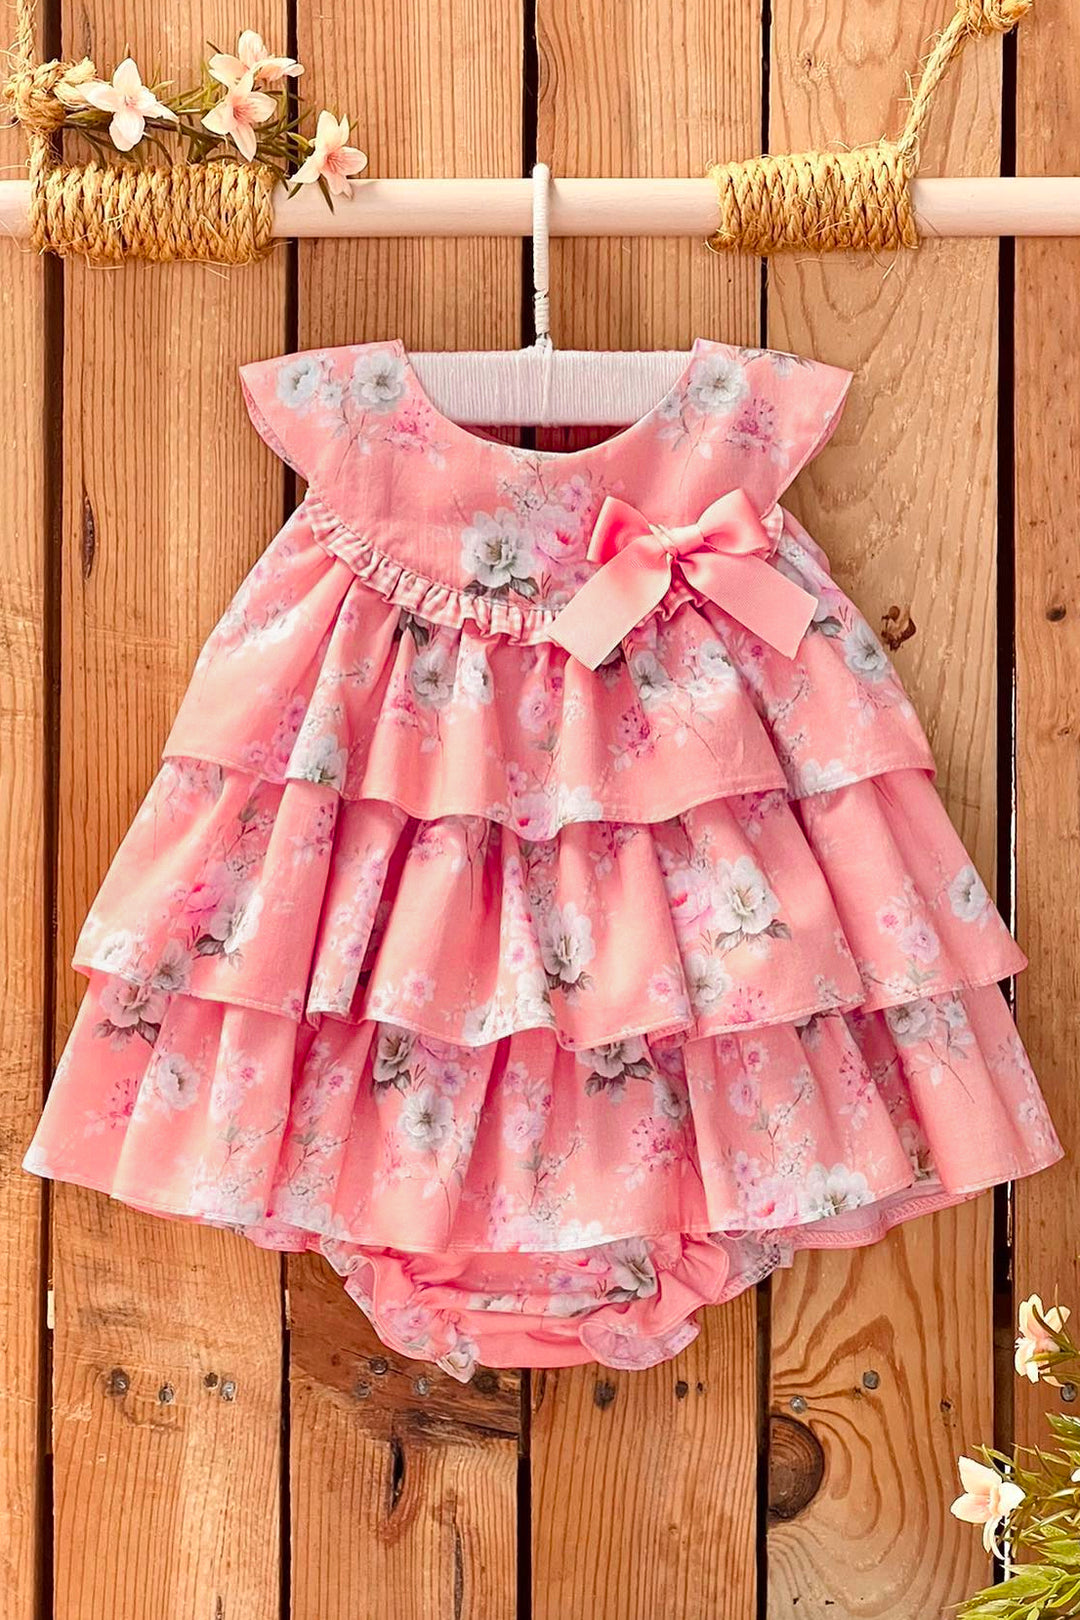 Valentina Bebes "Mollie" Pink Floral Layered Dress & Bloomers | Millie and John